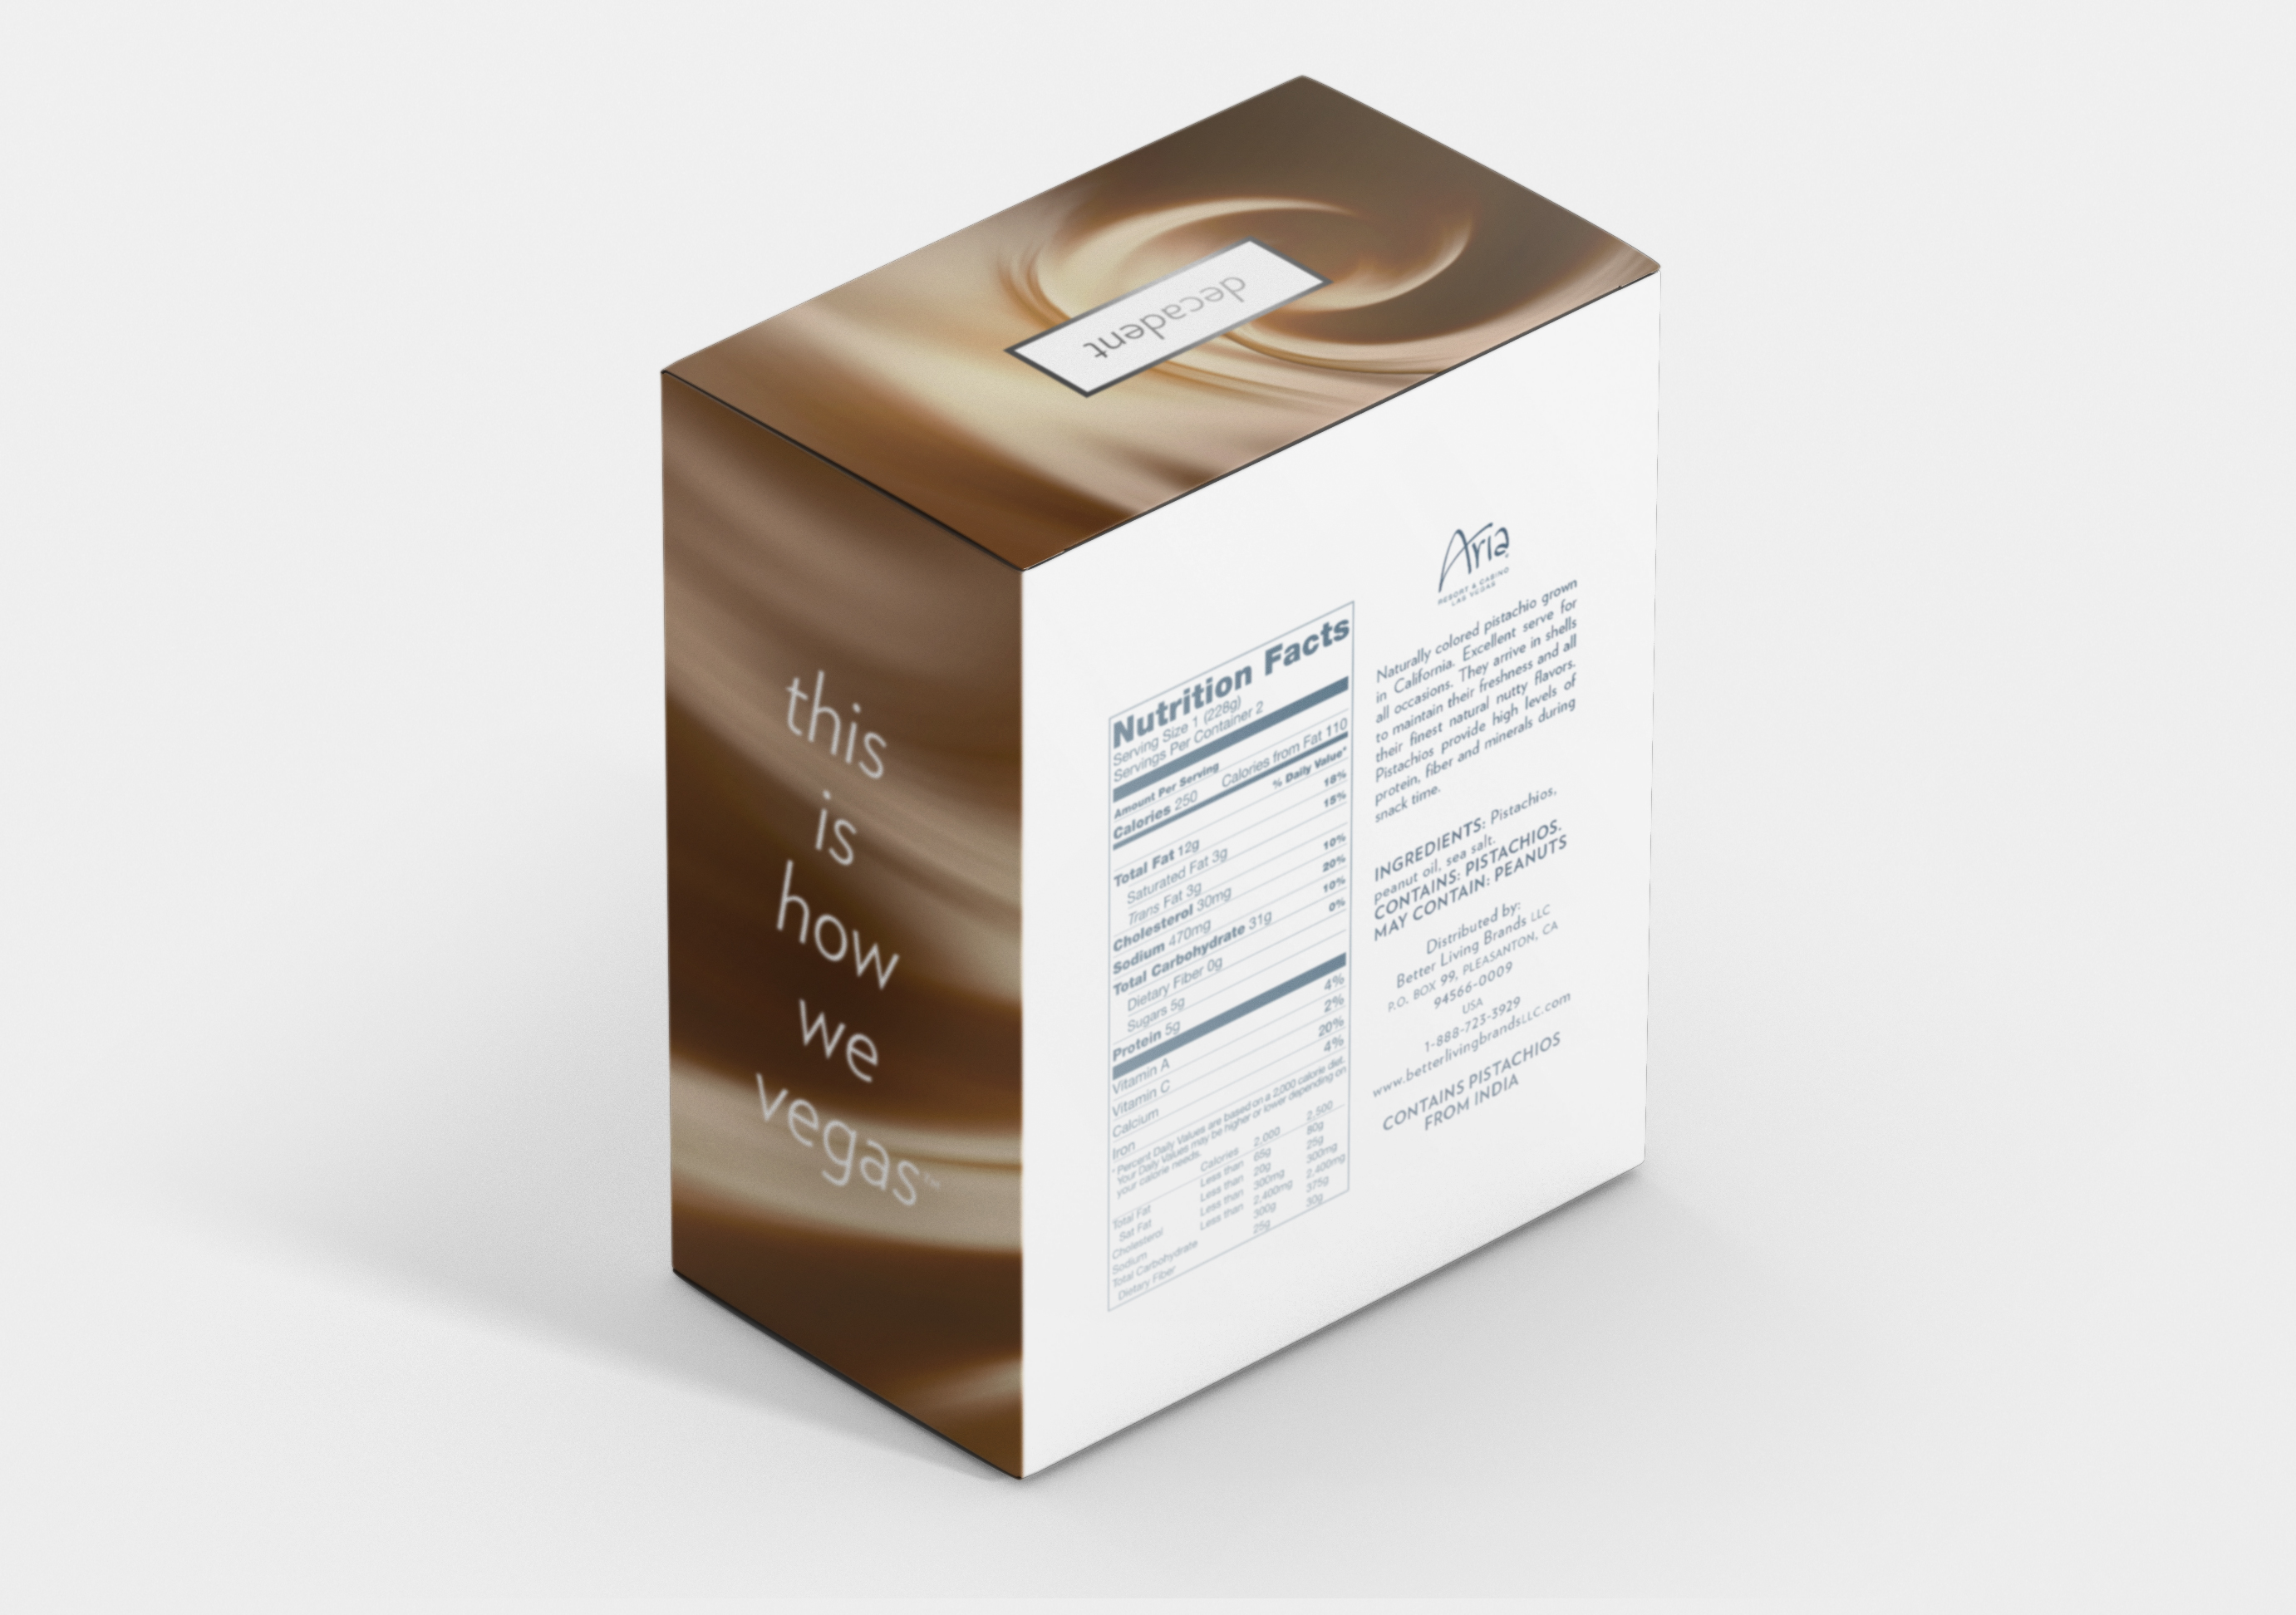 ARIA Resort and Casino Sky Suites almonds packaging design by Silky Szeto